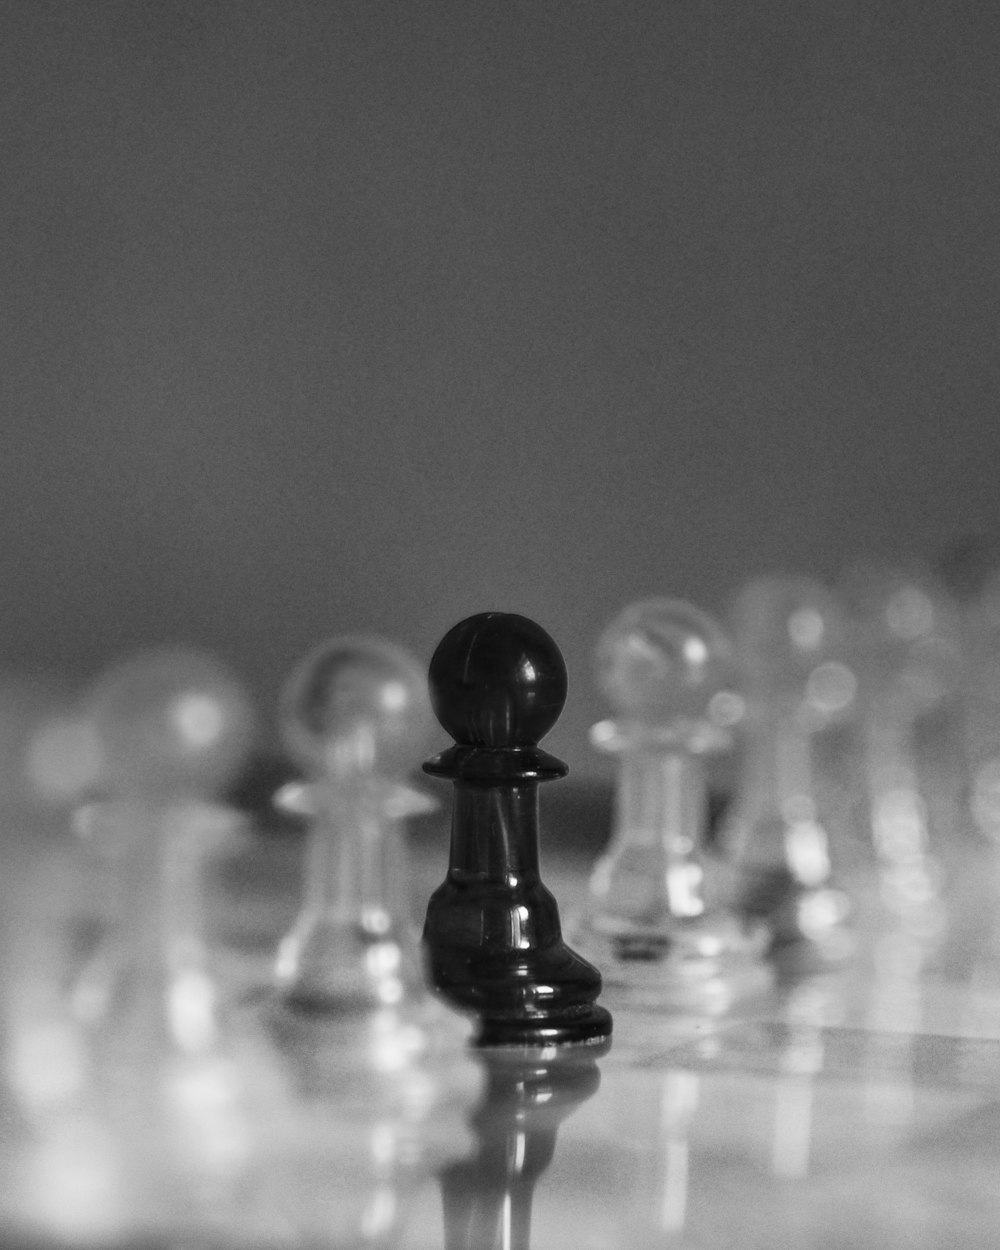 a black and white photo of a chess board